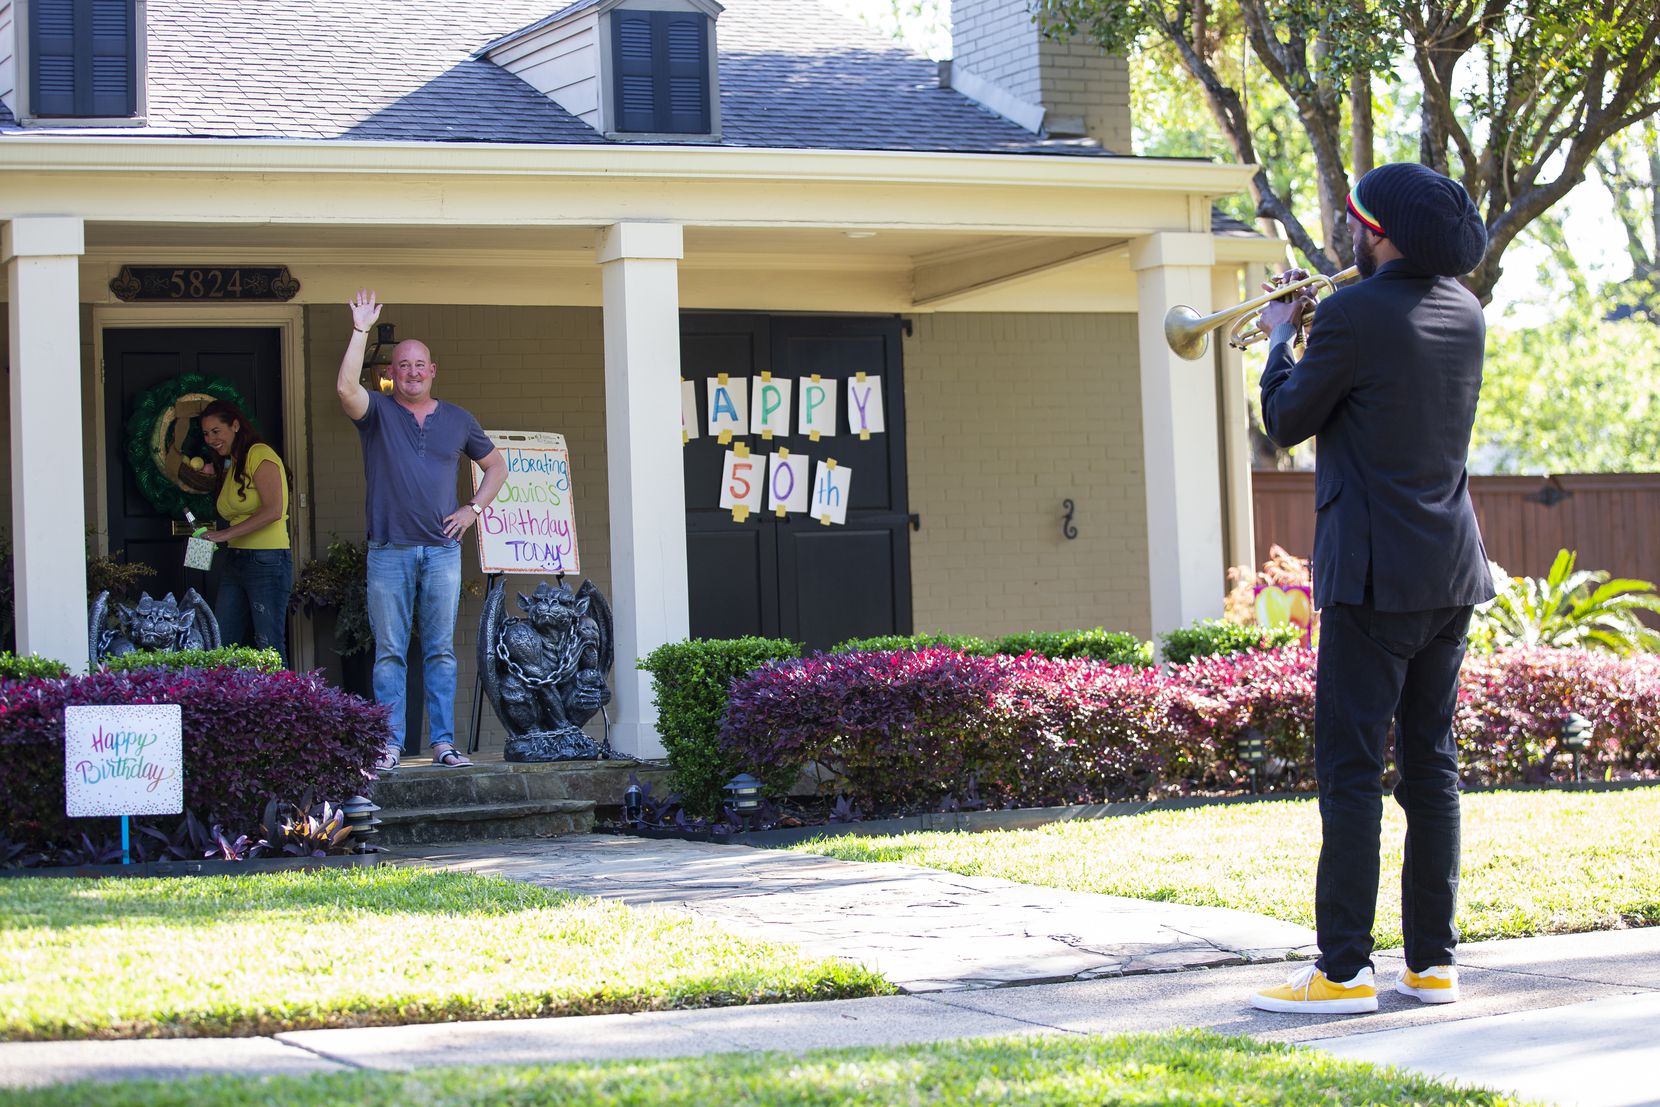 Trumpeter Alcedrick Todd (right) performs for David Hannah's 50th birthday outside of his house after his wife Dina Hannah posted on the Nextdoor app looking for a trumpet player on April 10, 2020 in Dallas. The couple originally planned to celebrate the birthday in New Orleans. (Juan Figueroa/ The Dallas Morning News)